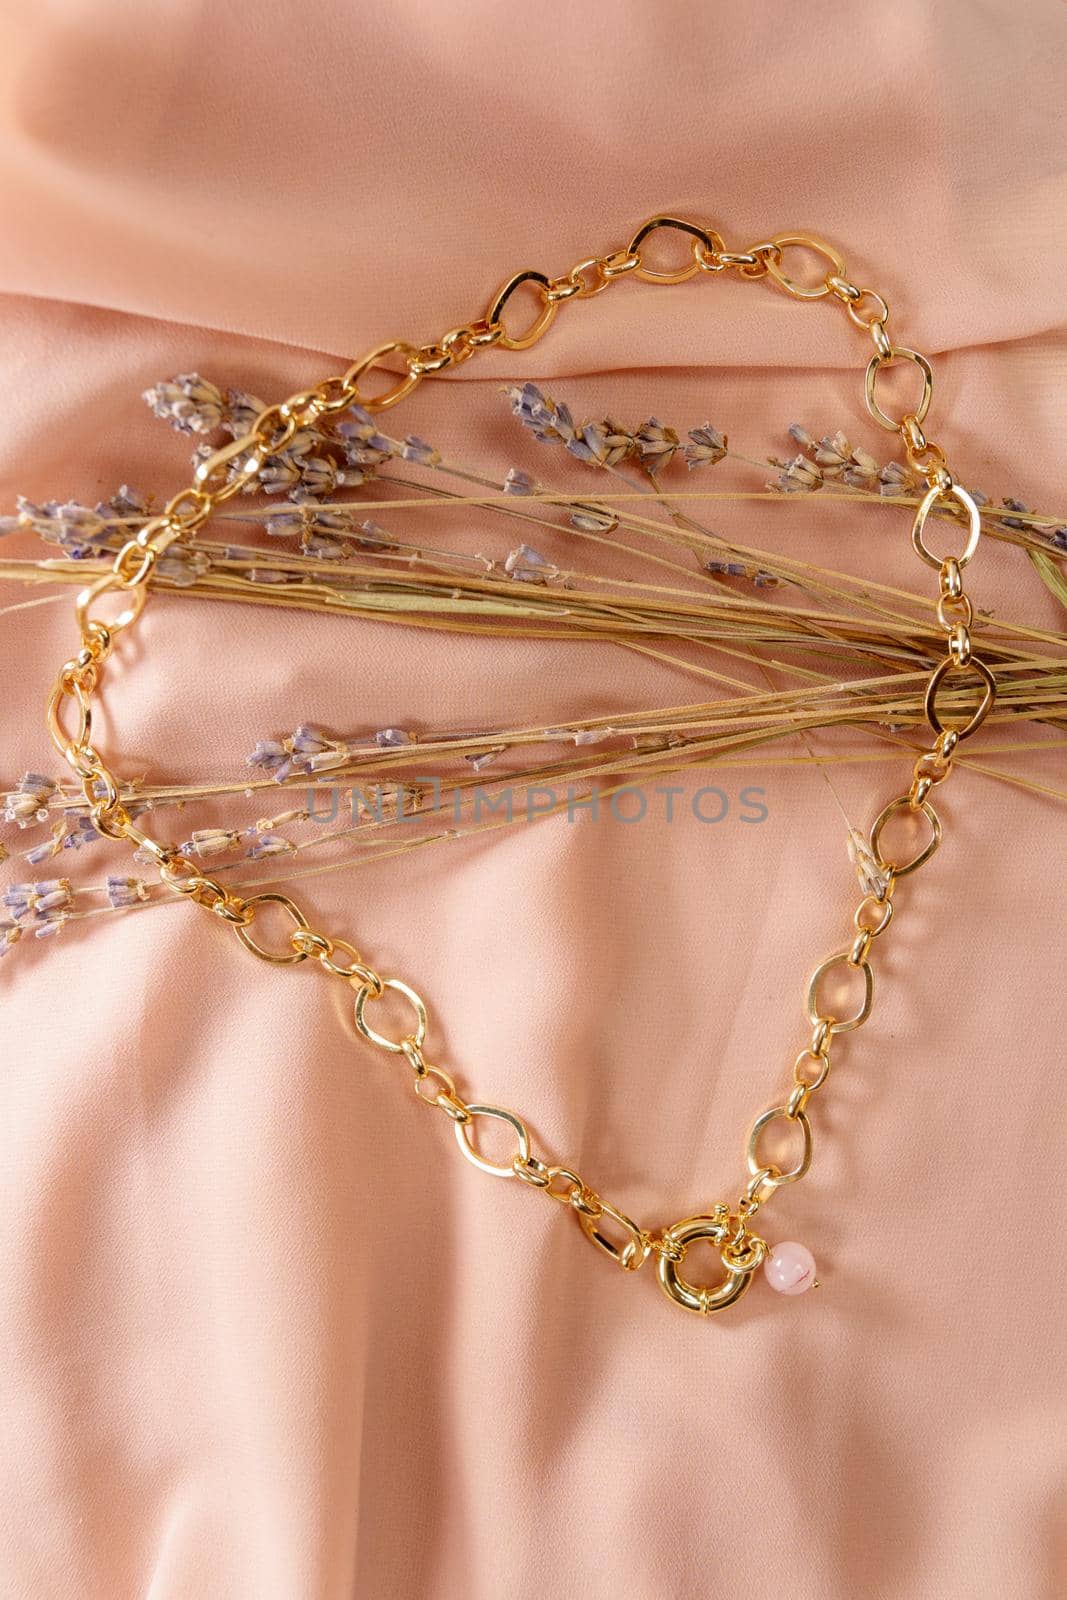 Gold chain natural mixed pink rose quartz necklace. Vertical photo